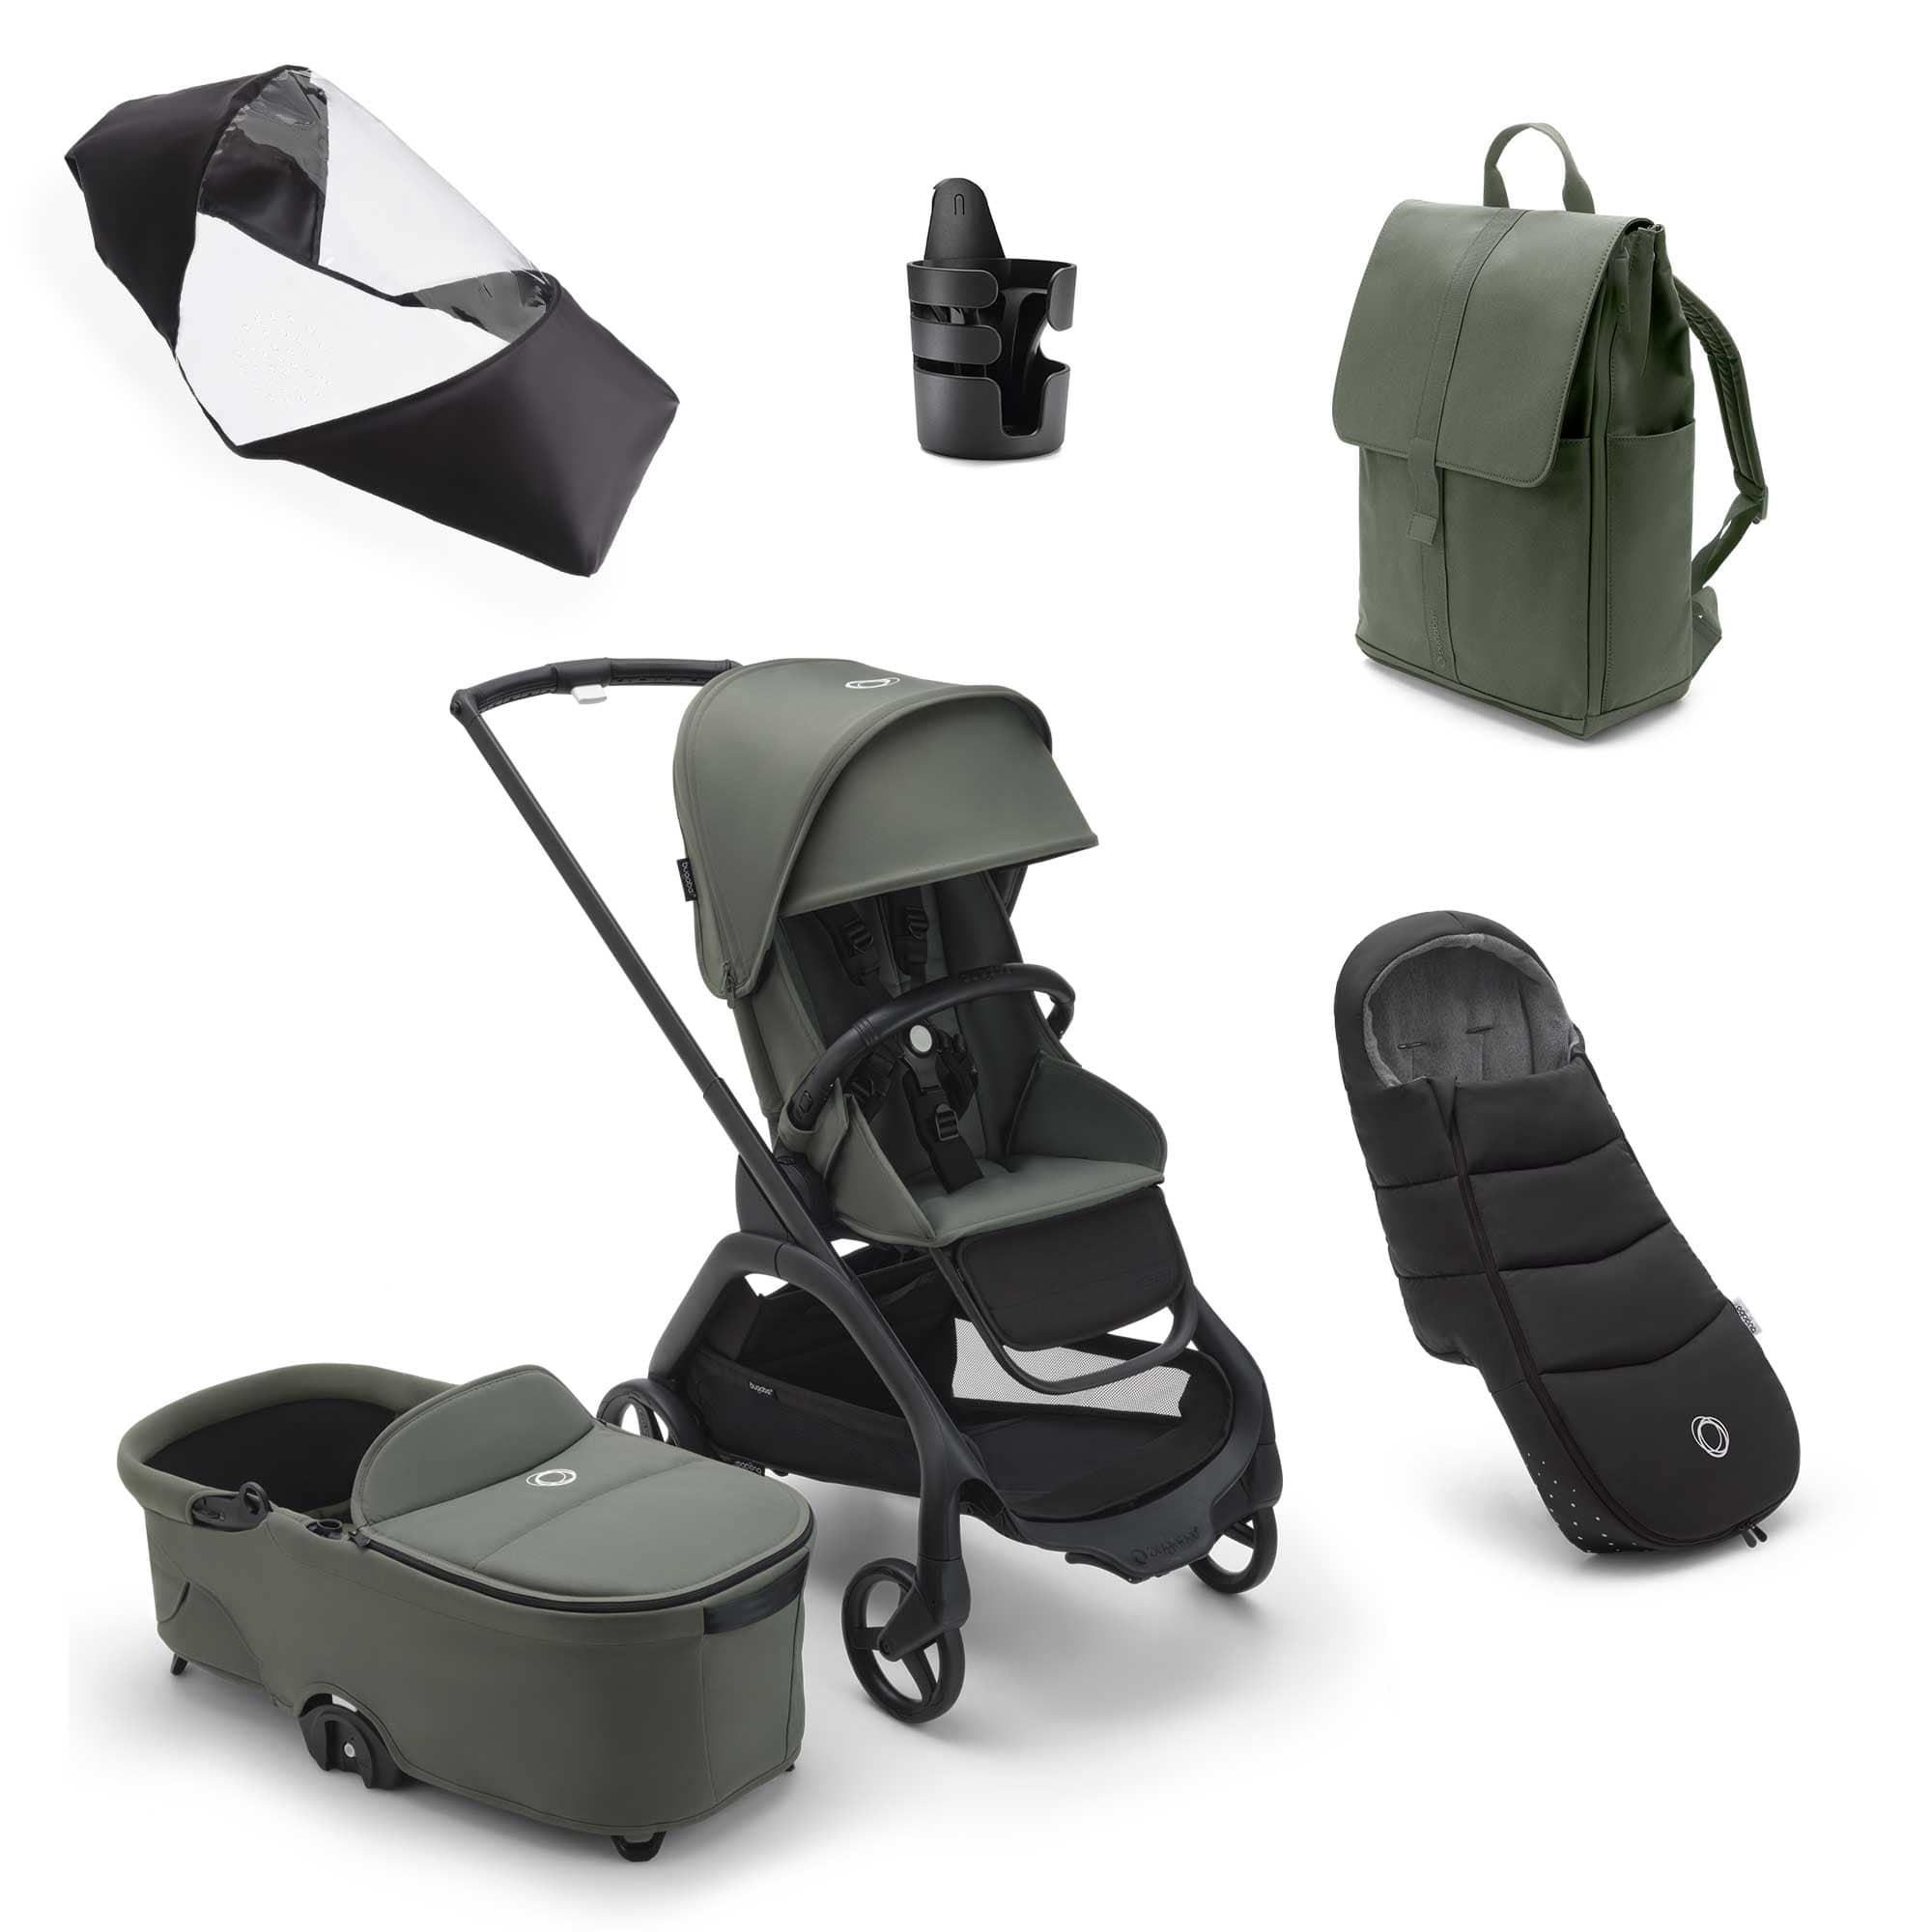 Bugaboo Baby Prams Bugaboo Dragonfly Complete Bundle in Black/Forest Green 13814-BLK-FOR-GRN